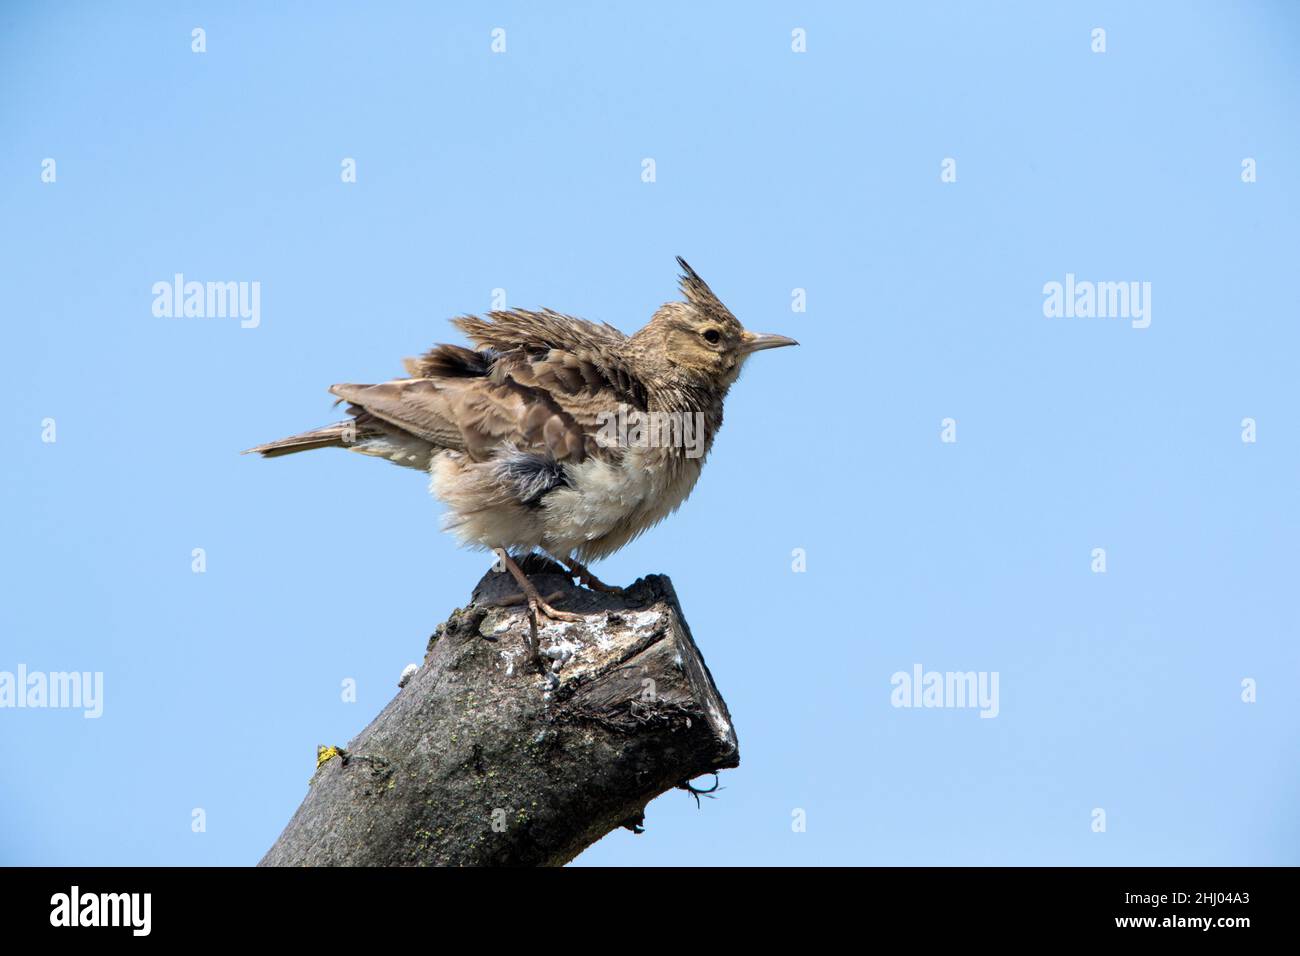 Crested lark, (Galerida cristata), perched on stump, shaking its feathers, Alentejo, Portugal Stock Photo